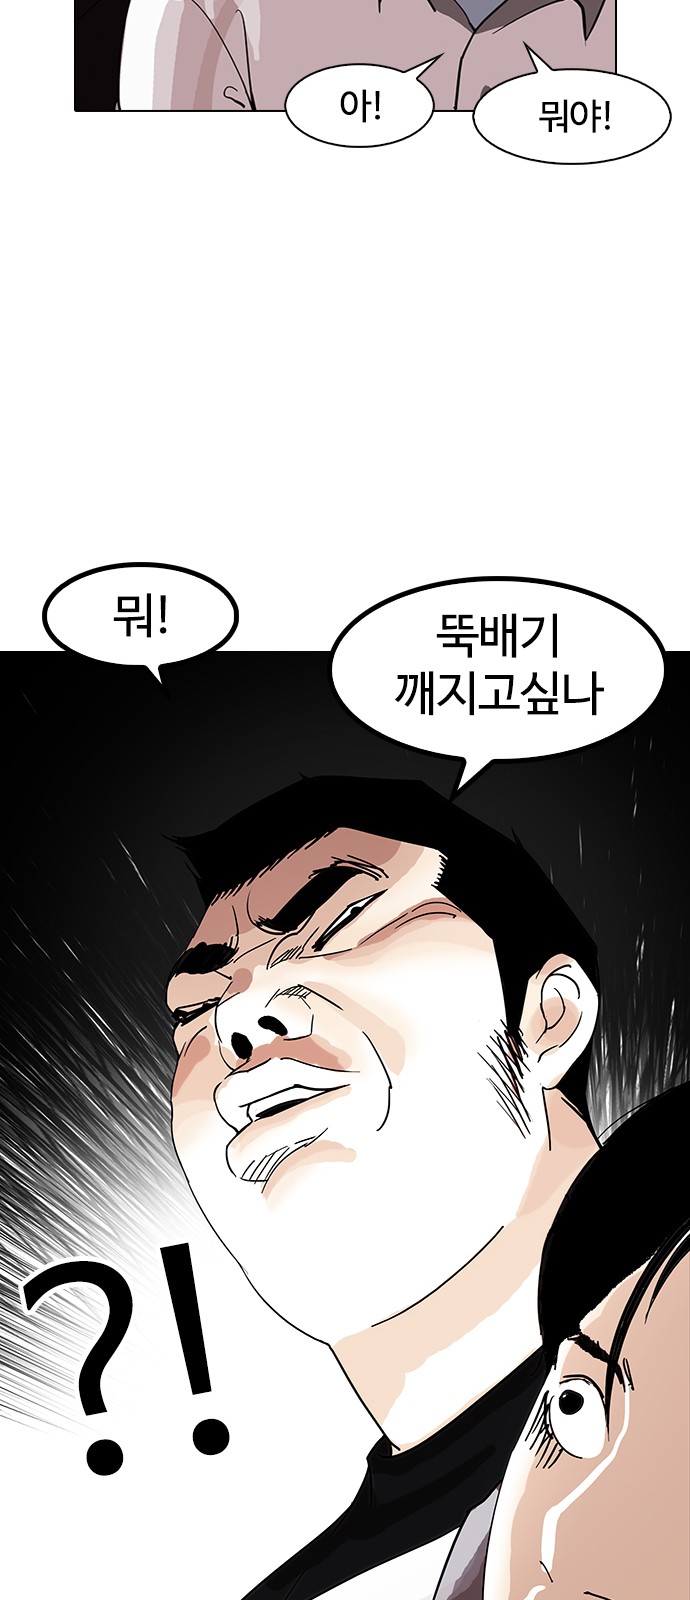 Lookism - Chapter 143 - Page 2